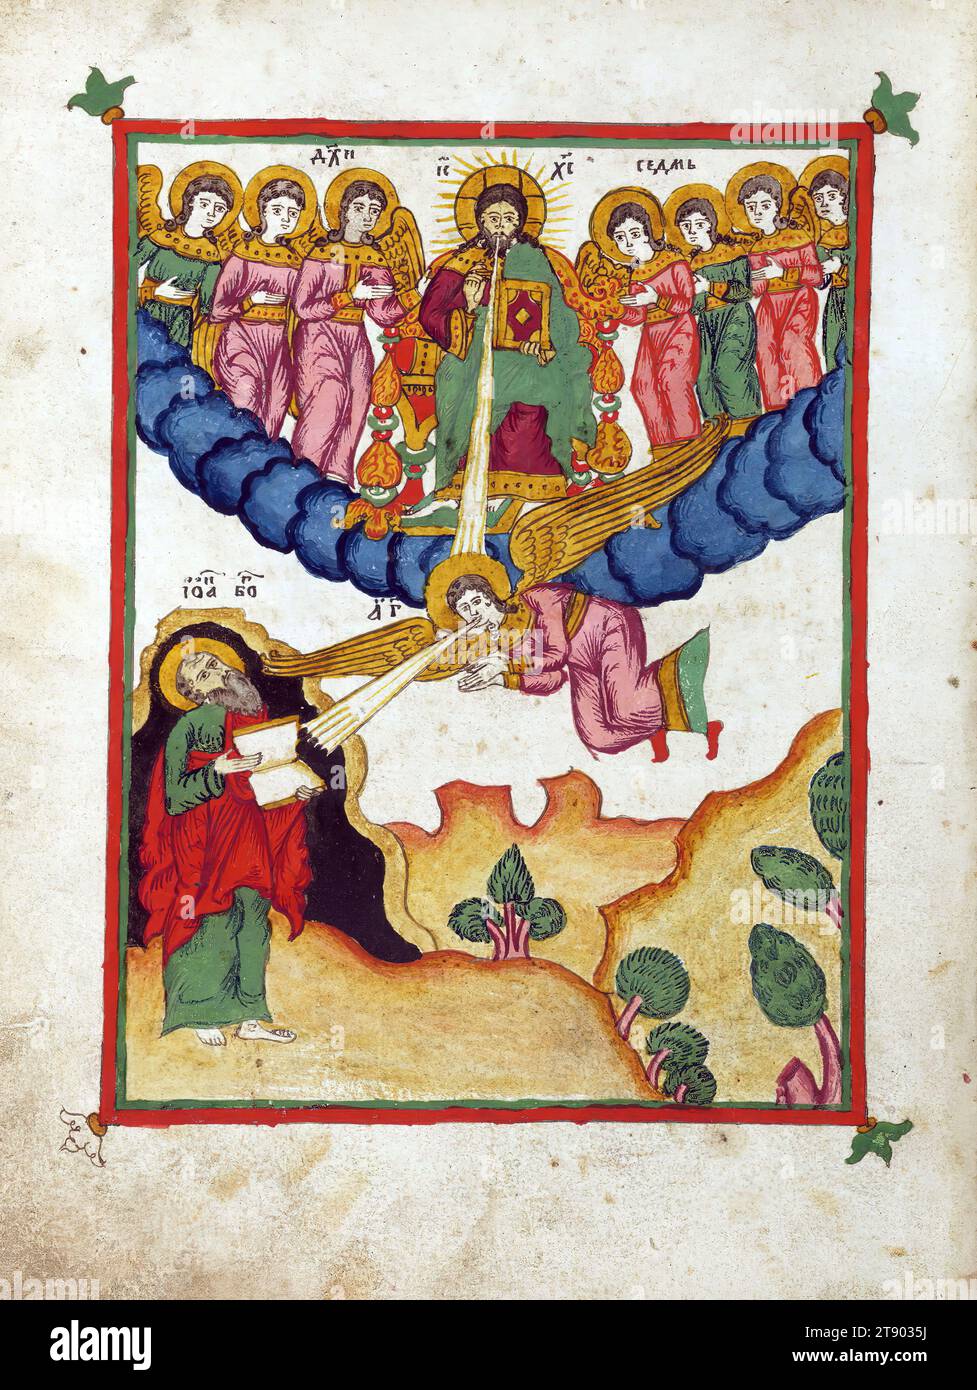 Apocalypse with Patristic commentary, Christ inspiring St. John, This manuscript was made around 1800 by the 'Old Believers,' a group of Russian Christians who dissented from the Russian Orthodox Church and were subsequently persecuted and excommunicated. Because their books were often confiscated and they were forbidden to use printing presses, they continued to write important works such as this one by hand Stock Photo